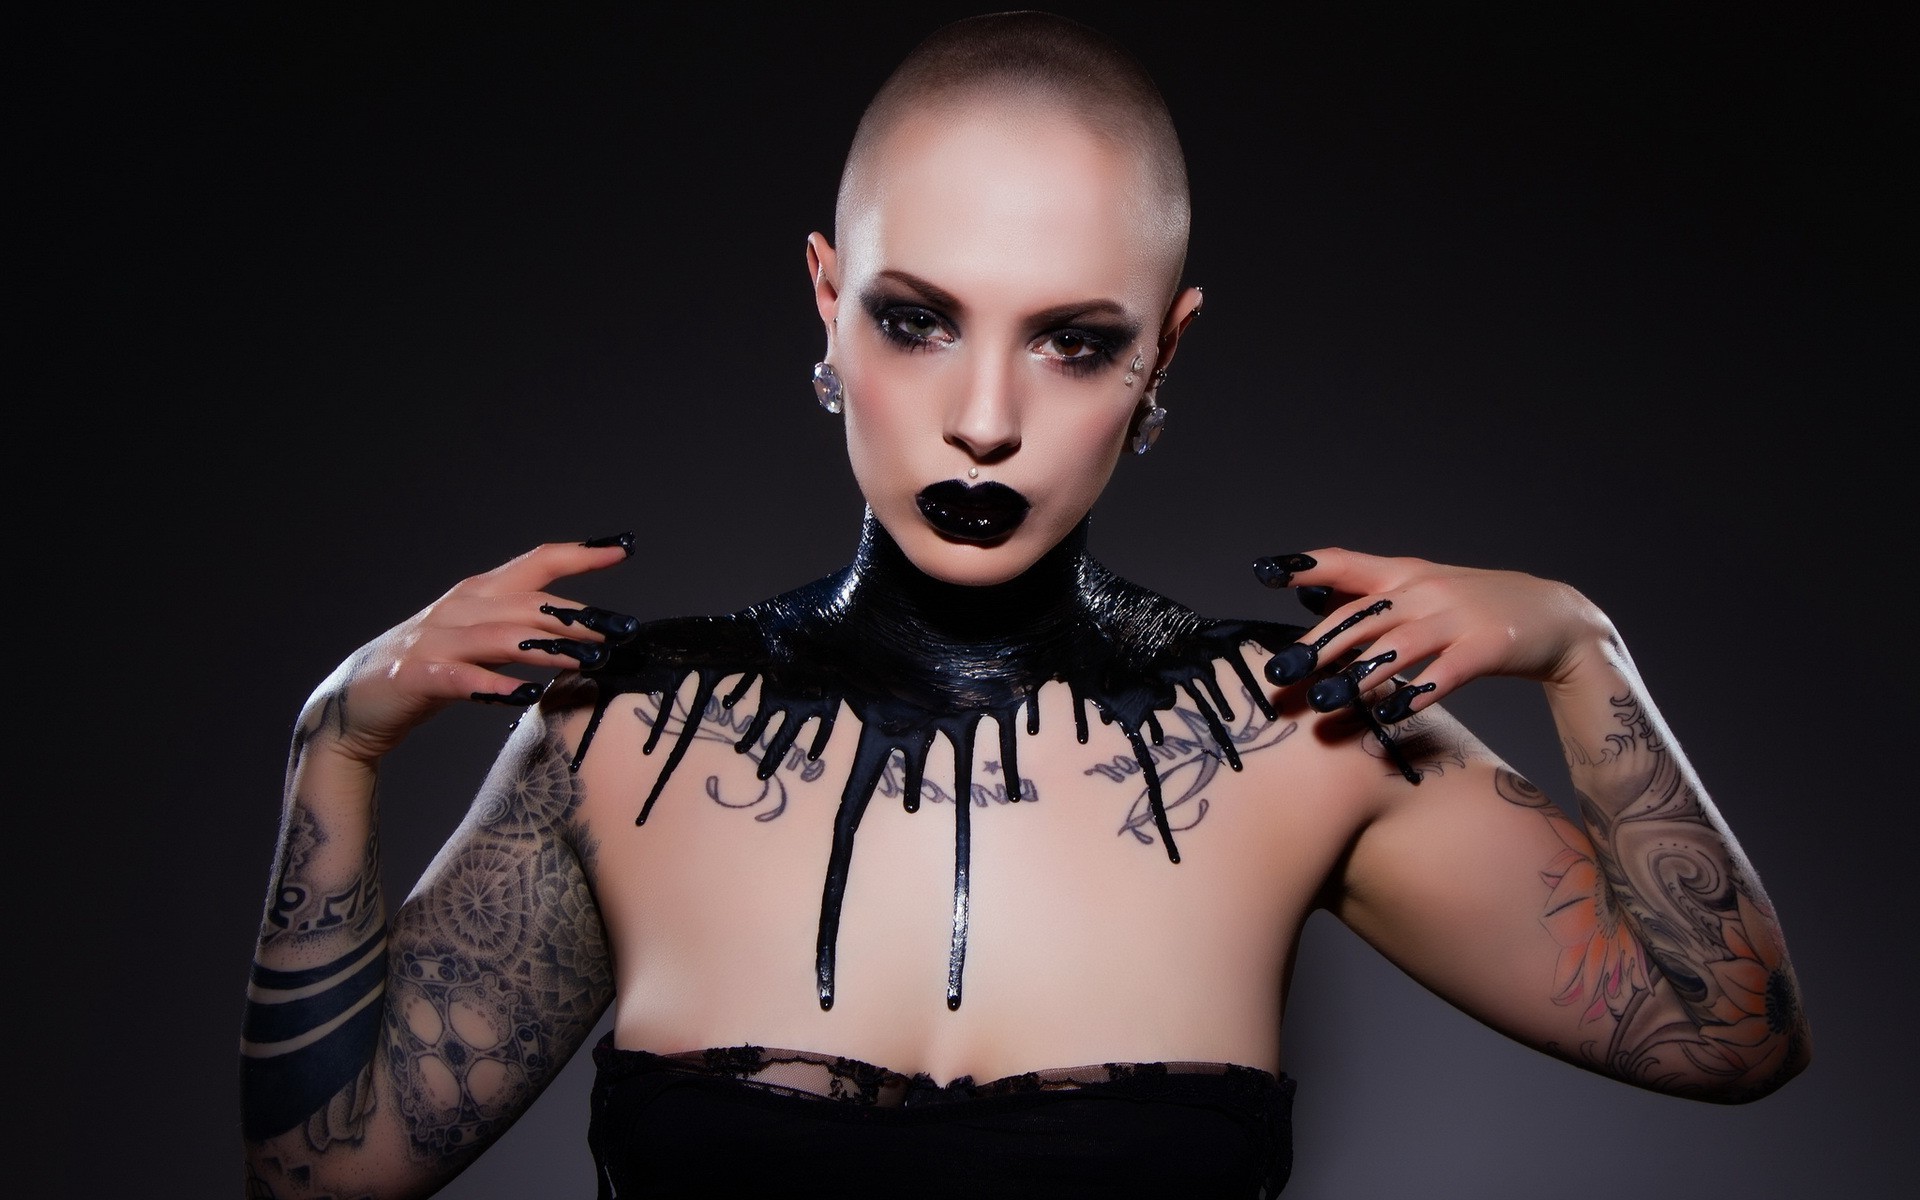 women, Model, Gothic, Spooky, Shaved Heads, Tattoo Wallpaper